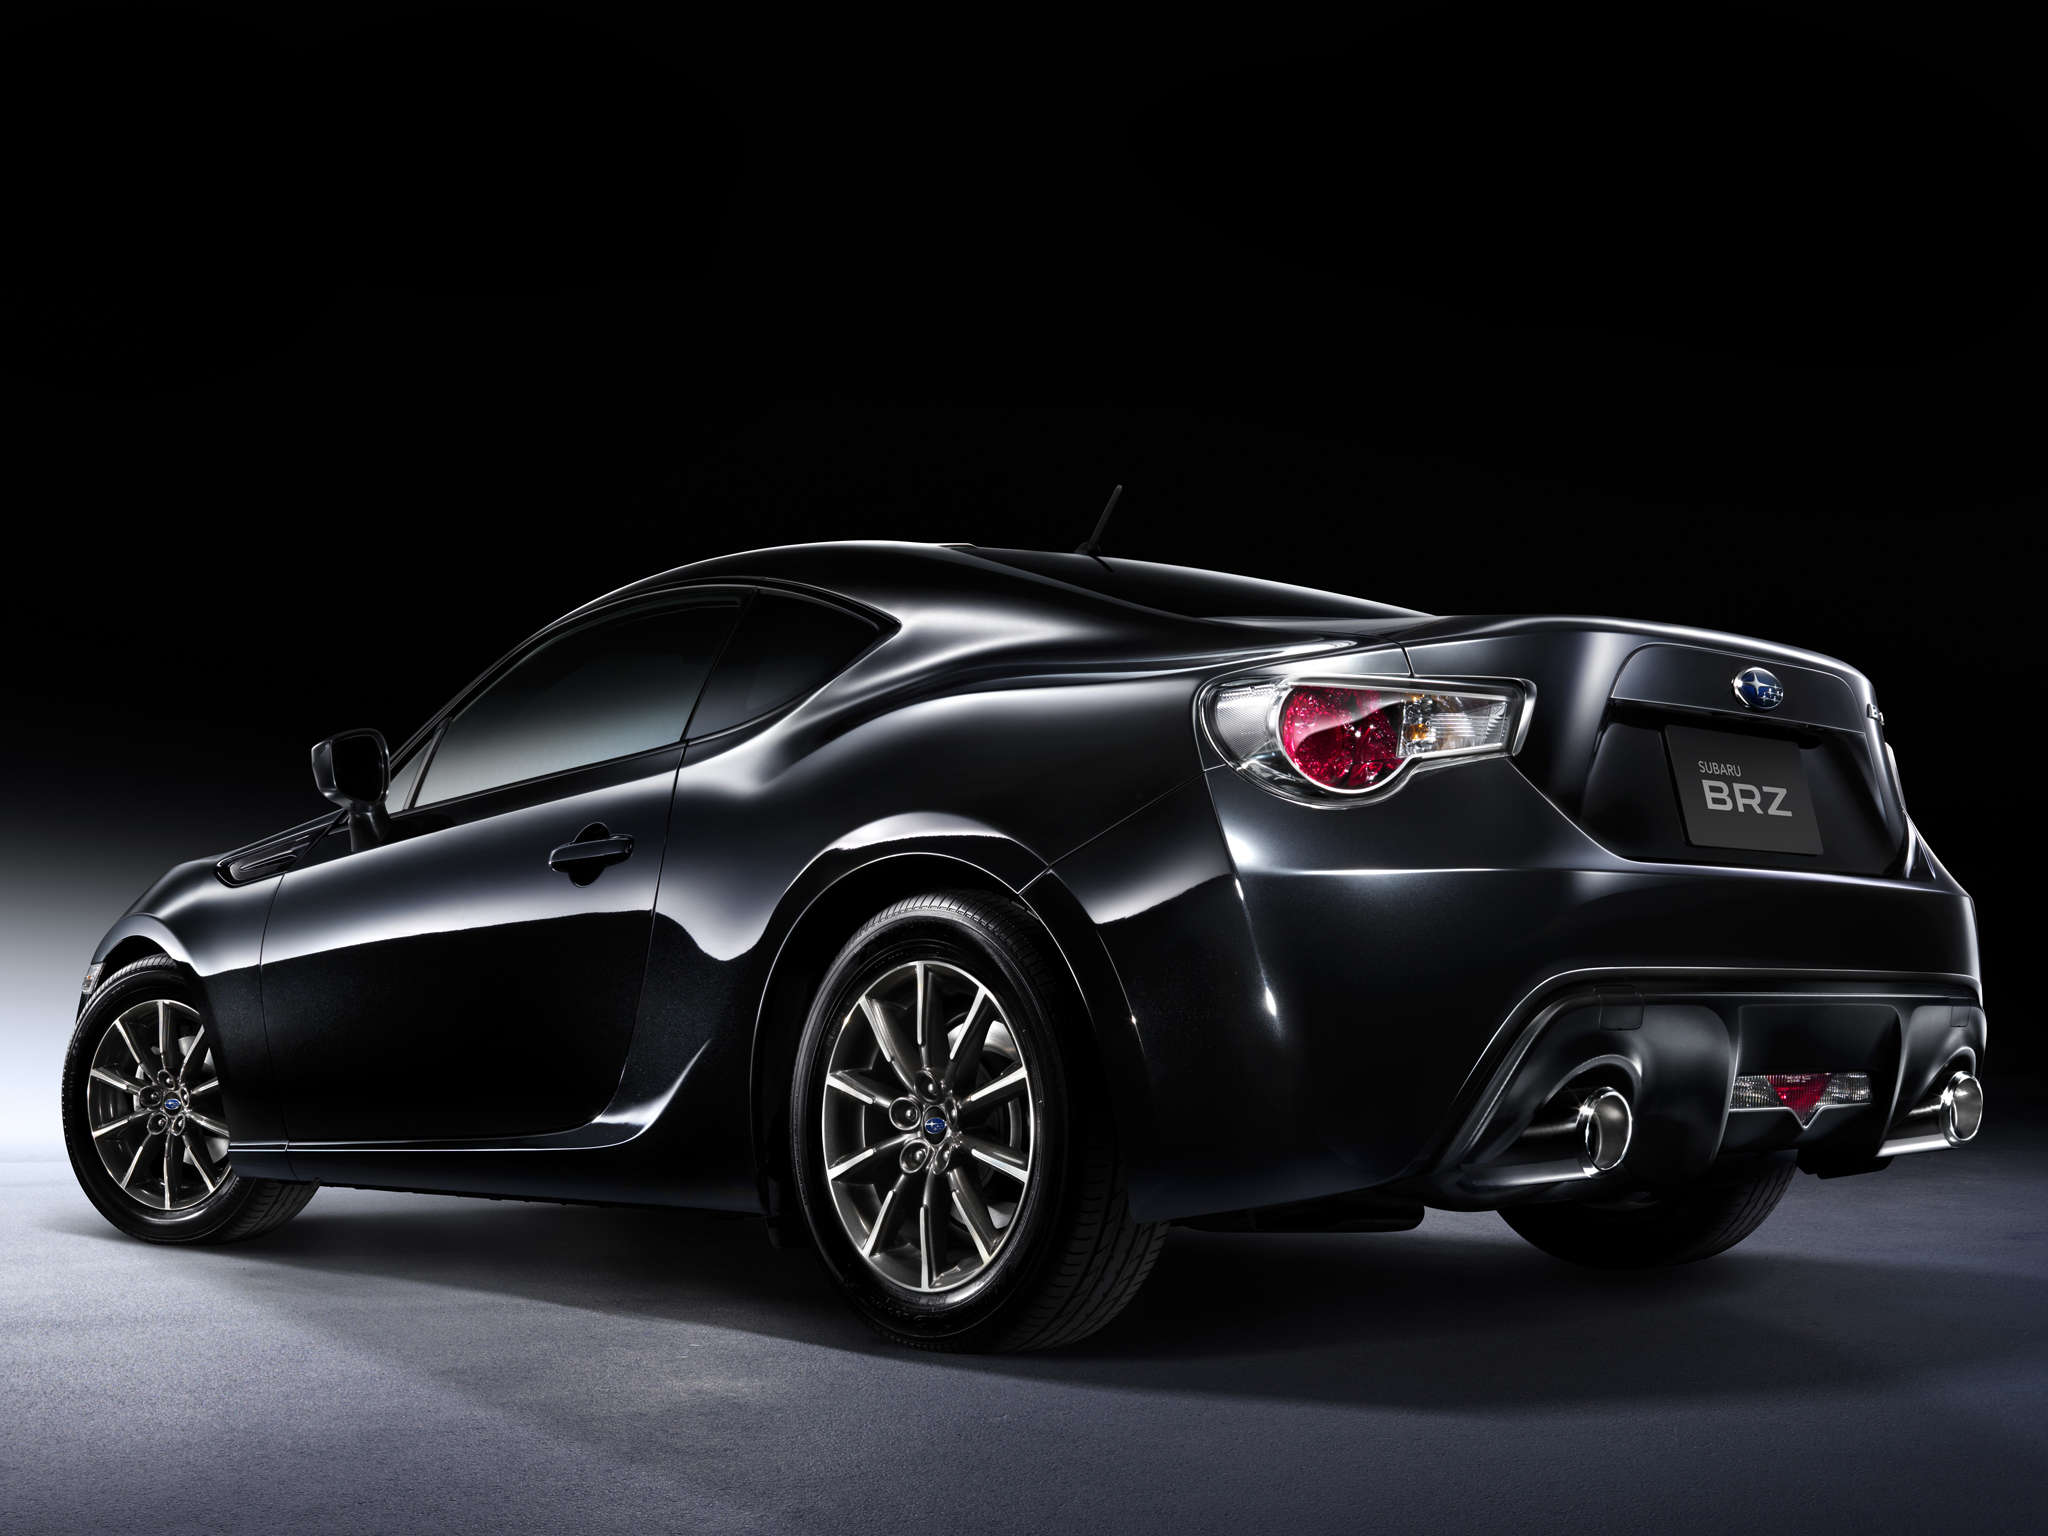 Subaru Brz Black Wallpaper 3d Pictures In High Definition Or